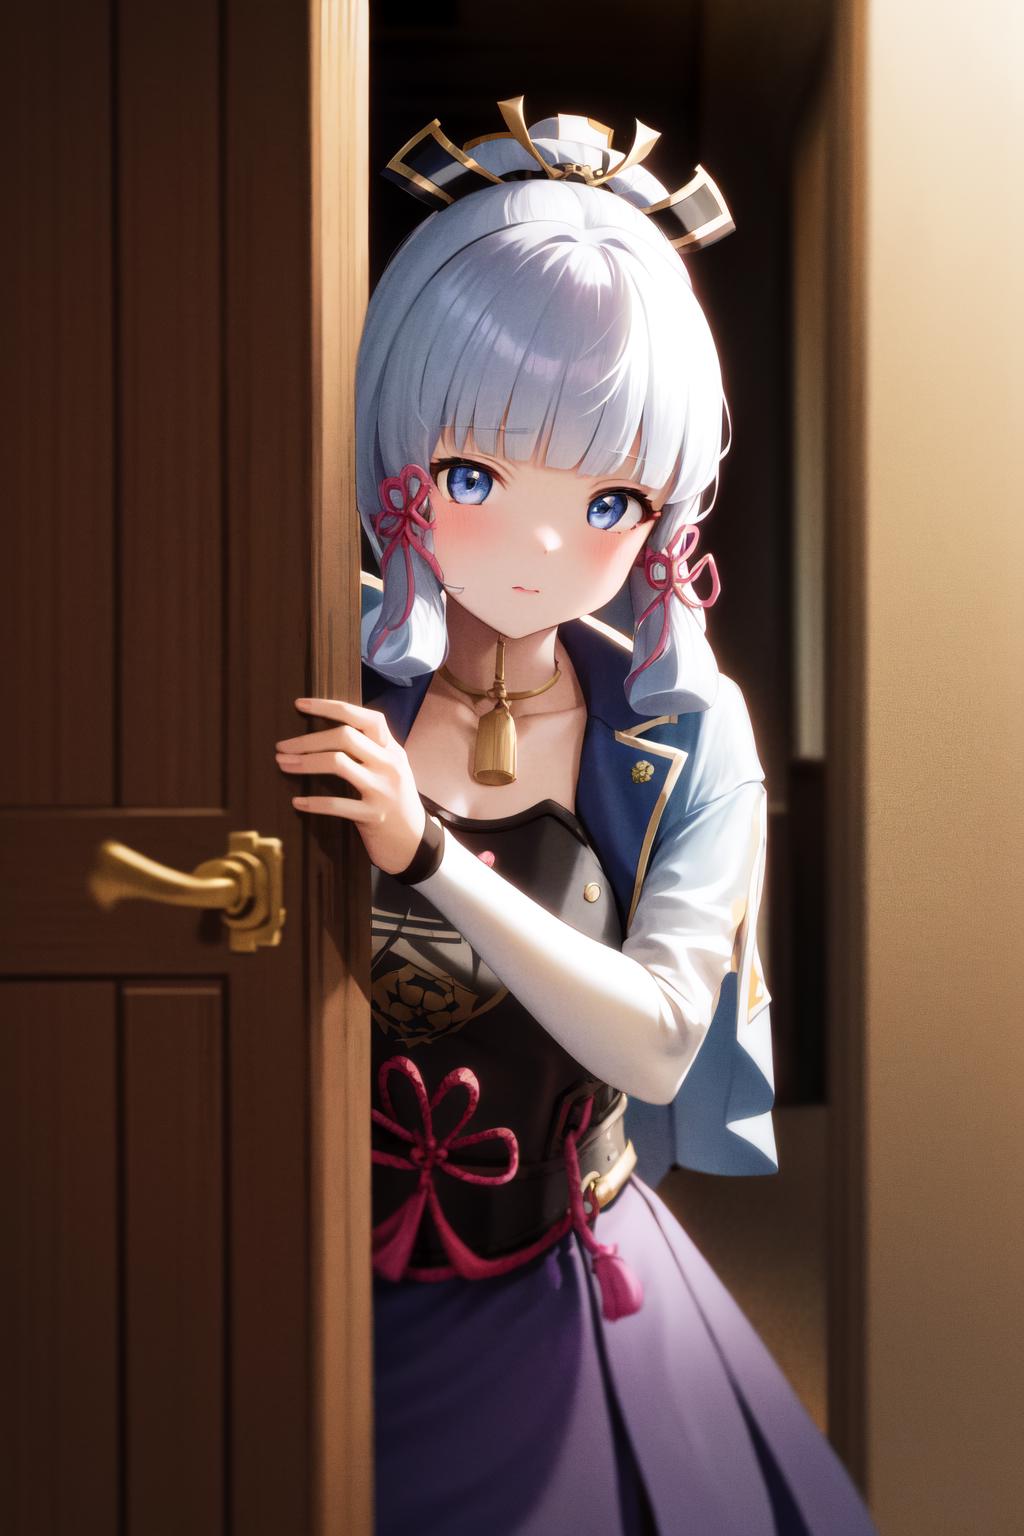 Anime girl reading a tutorial: How to open a door by Verialic on DeviantArt